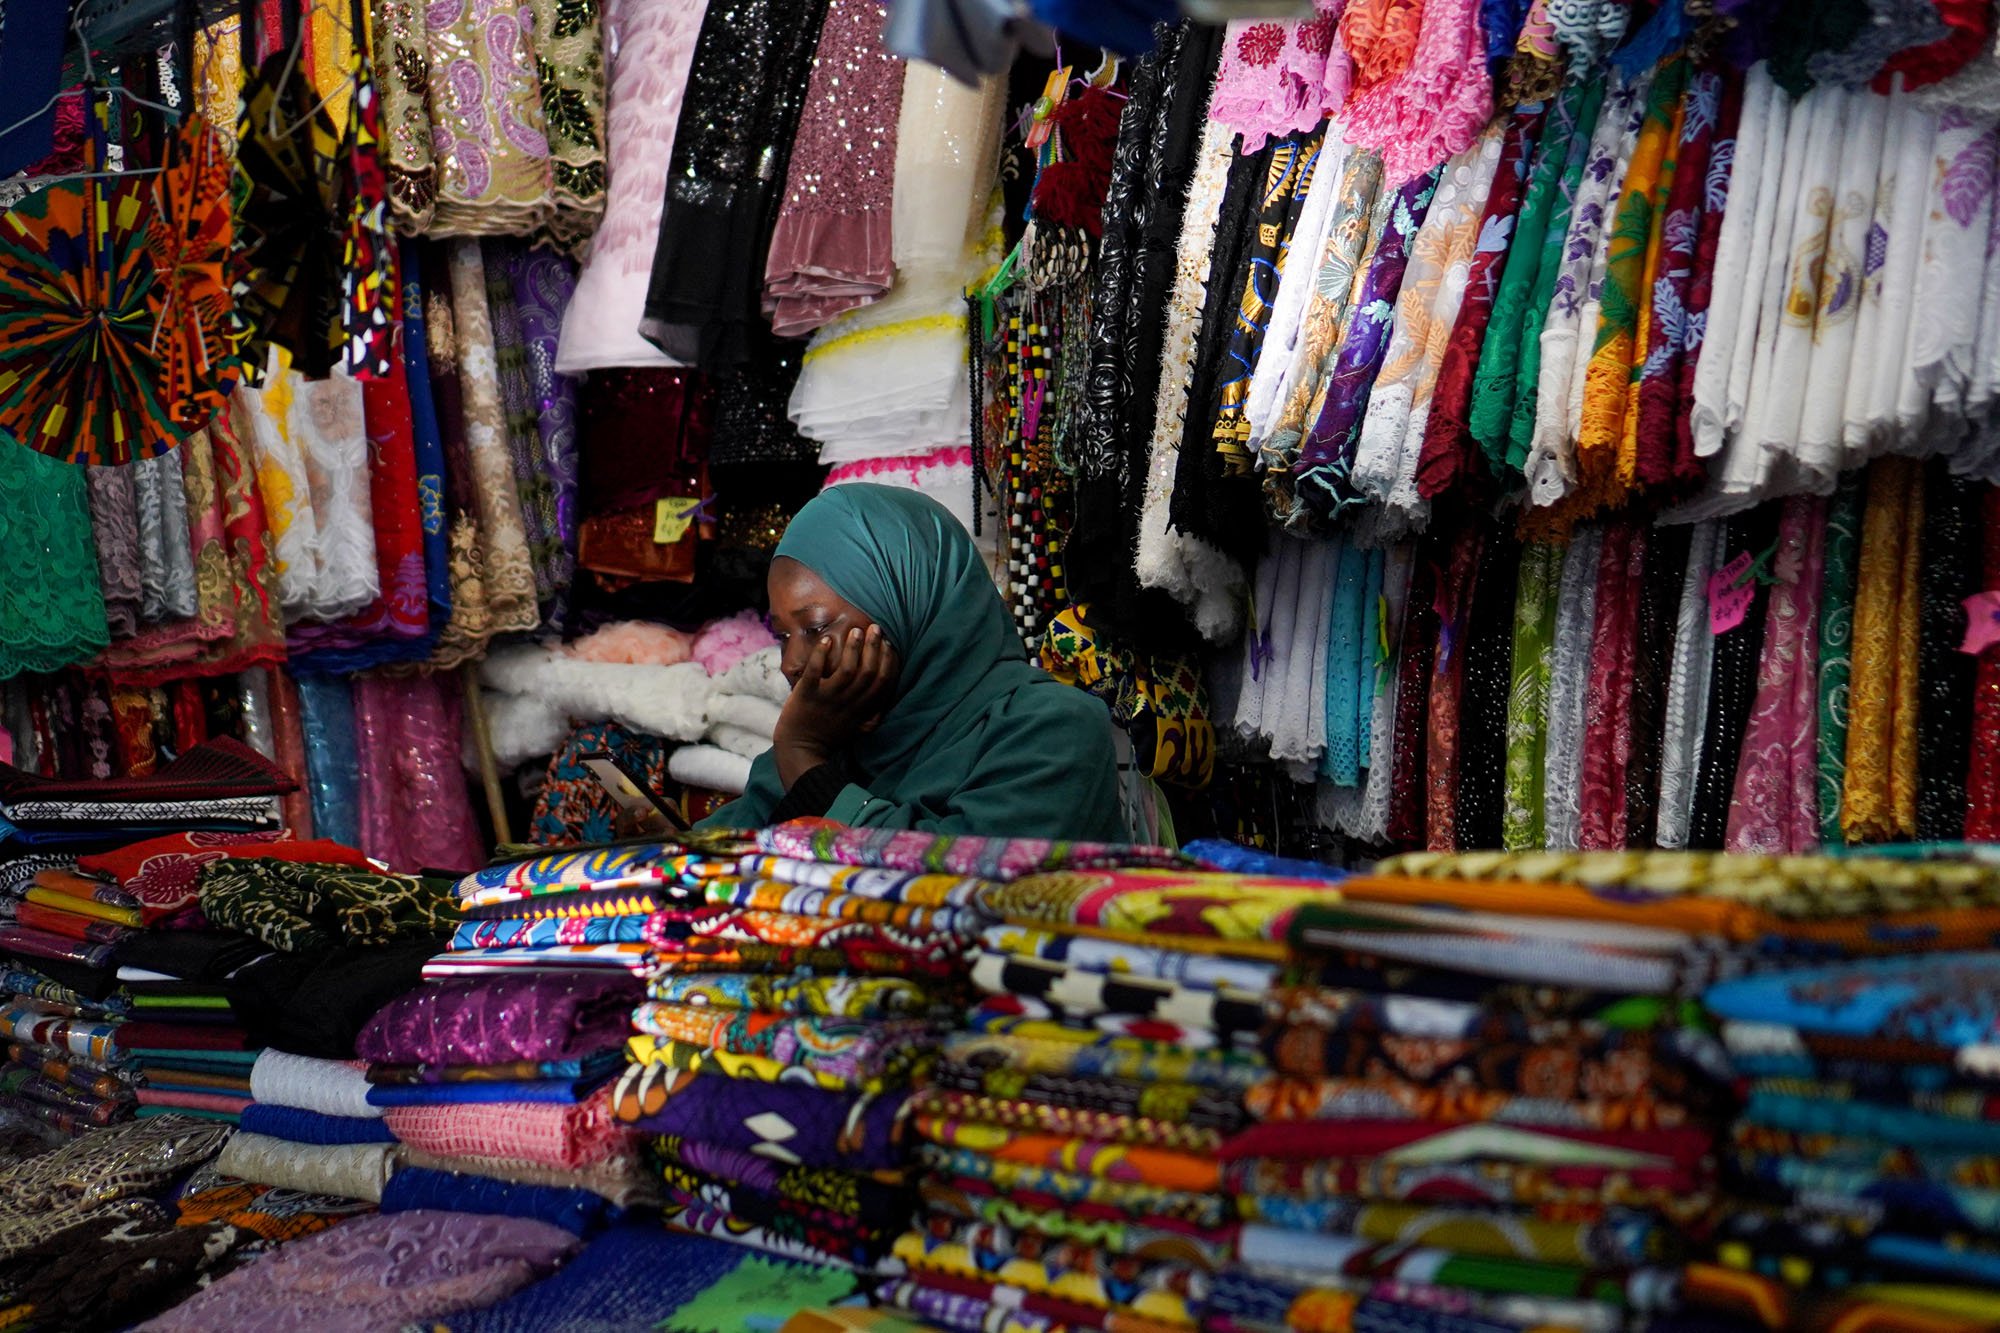 A woman props her head in her hand, leaning on piles of fabric at a market stall.